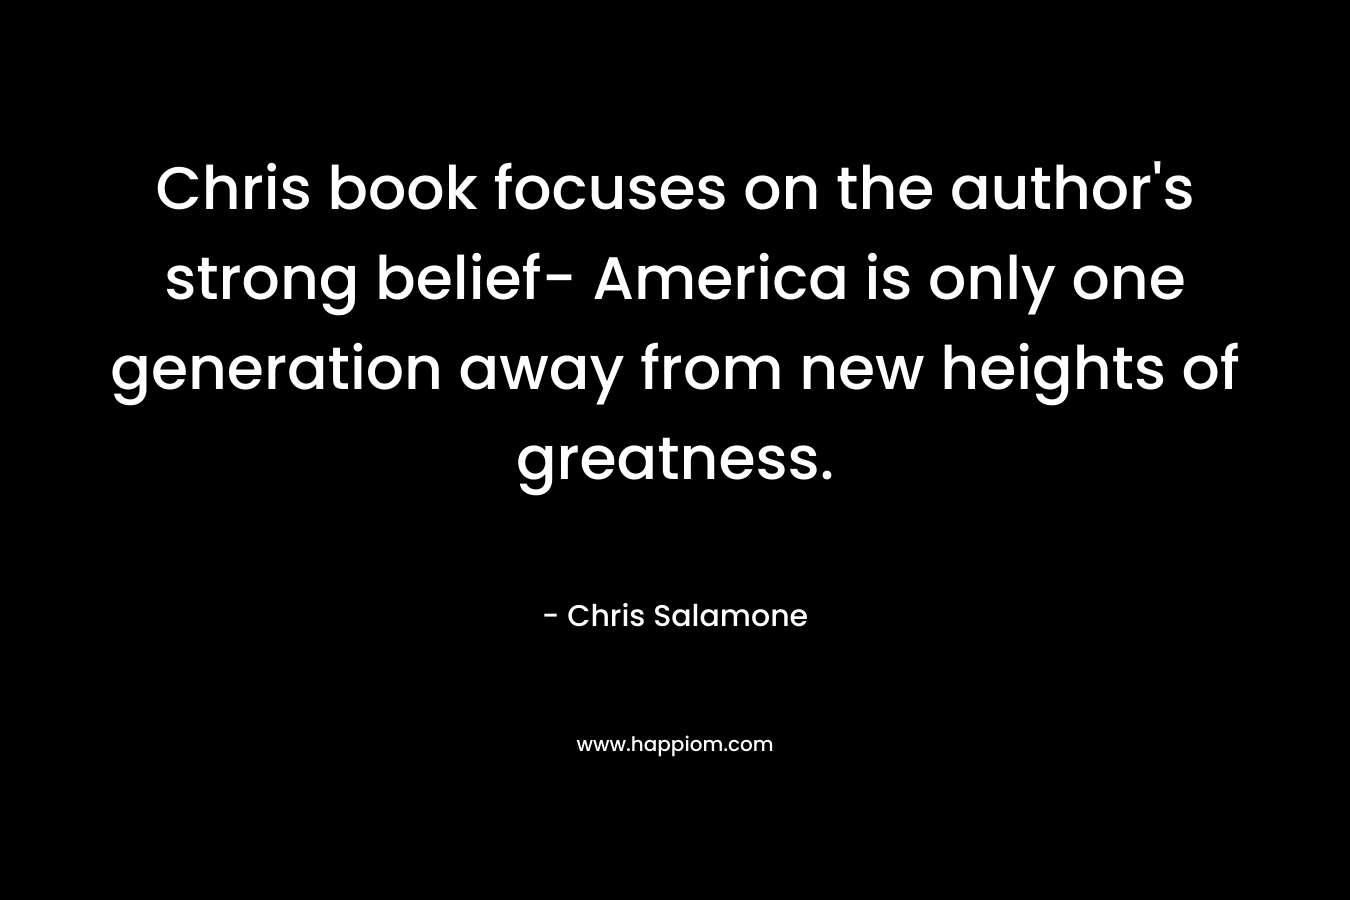 Chris book focuses on the author’s strong belief- America is only one generation away from new heights of greatness. – Chris Salamone